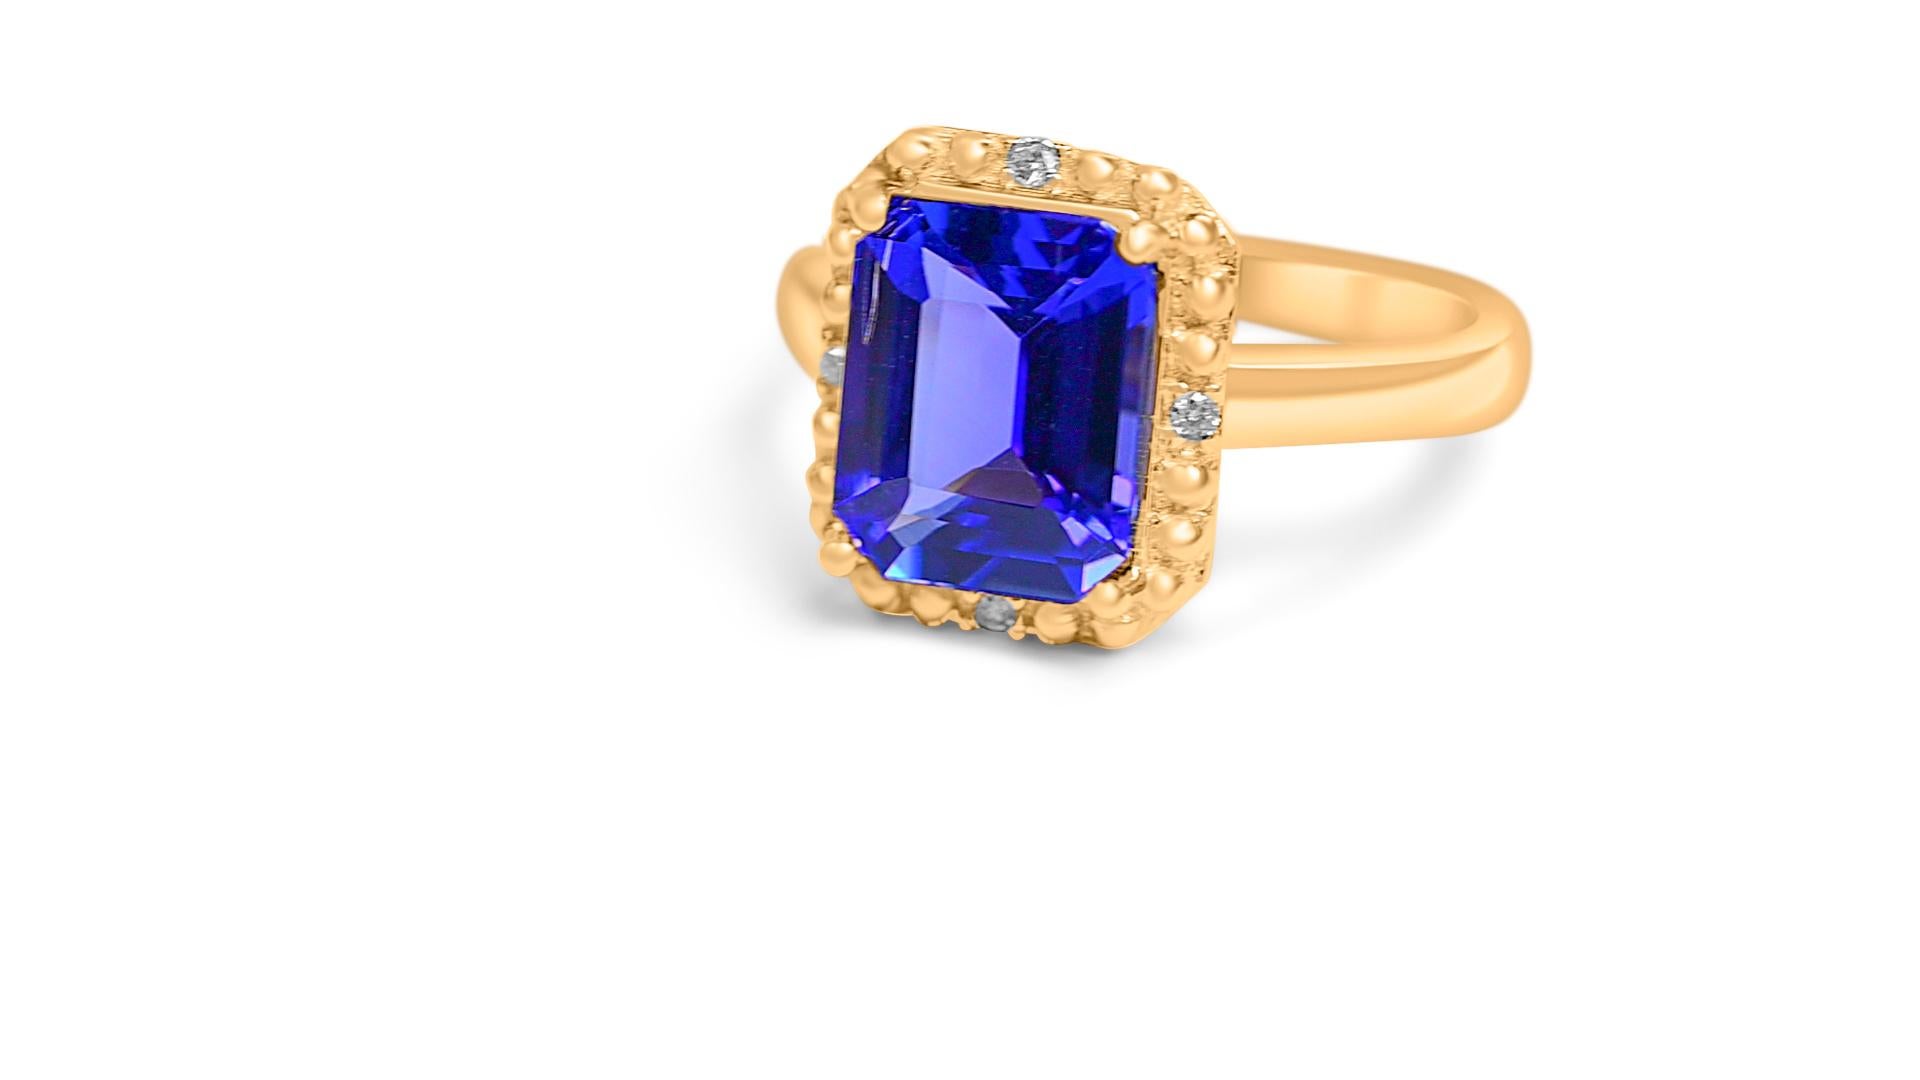 Welcome to Blue Star Gems NY LLC ! Discover popular engagement ring & wedding ring designs from classic to vintage inspired. We offer Joyful jewelry for everyday wear. Just for you. We go above and beyond the current industry standards to offer